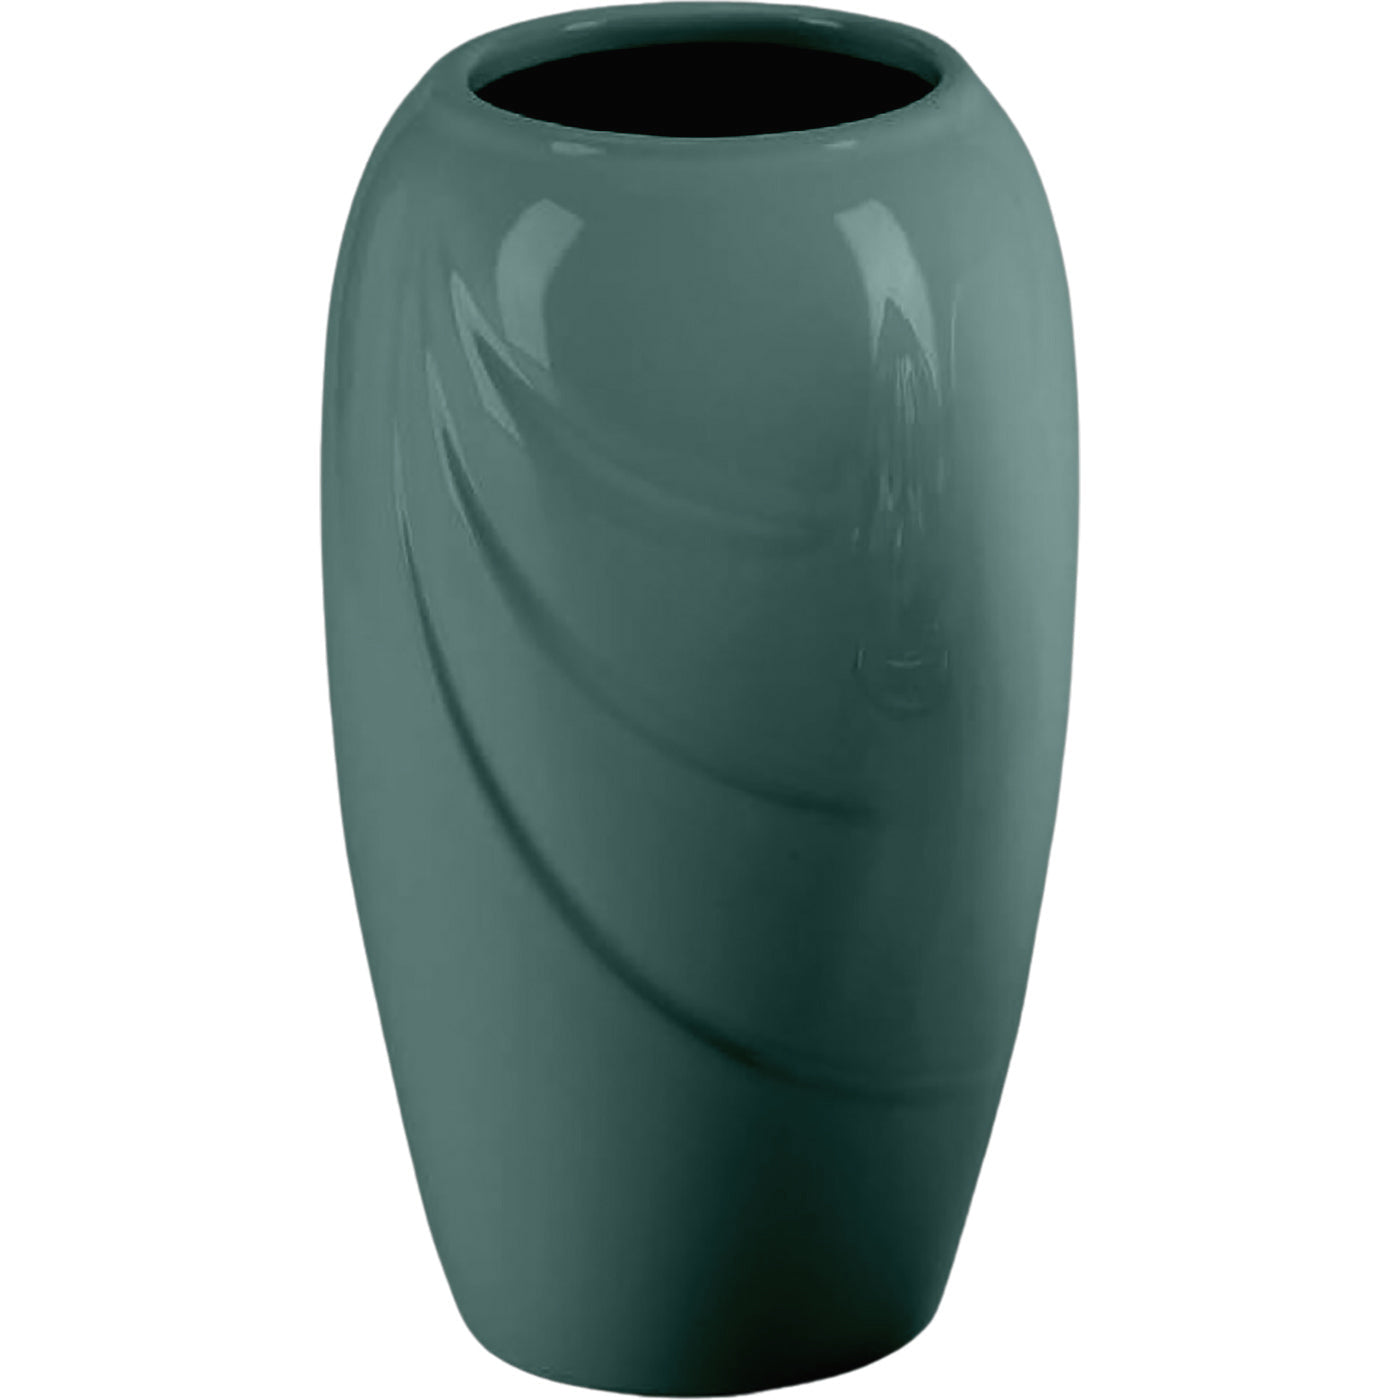 Grave vase Ecotre green 21x13cm - 8.3x5.1in In green porcelain, wall attached ECO150P/V